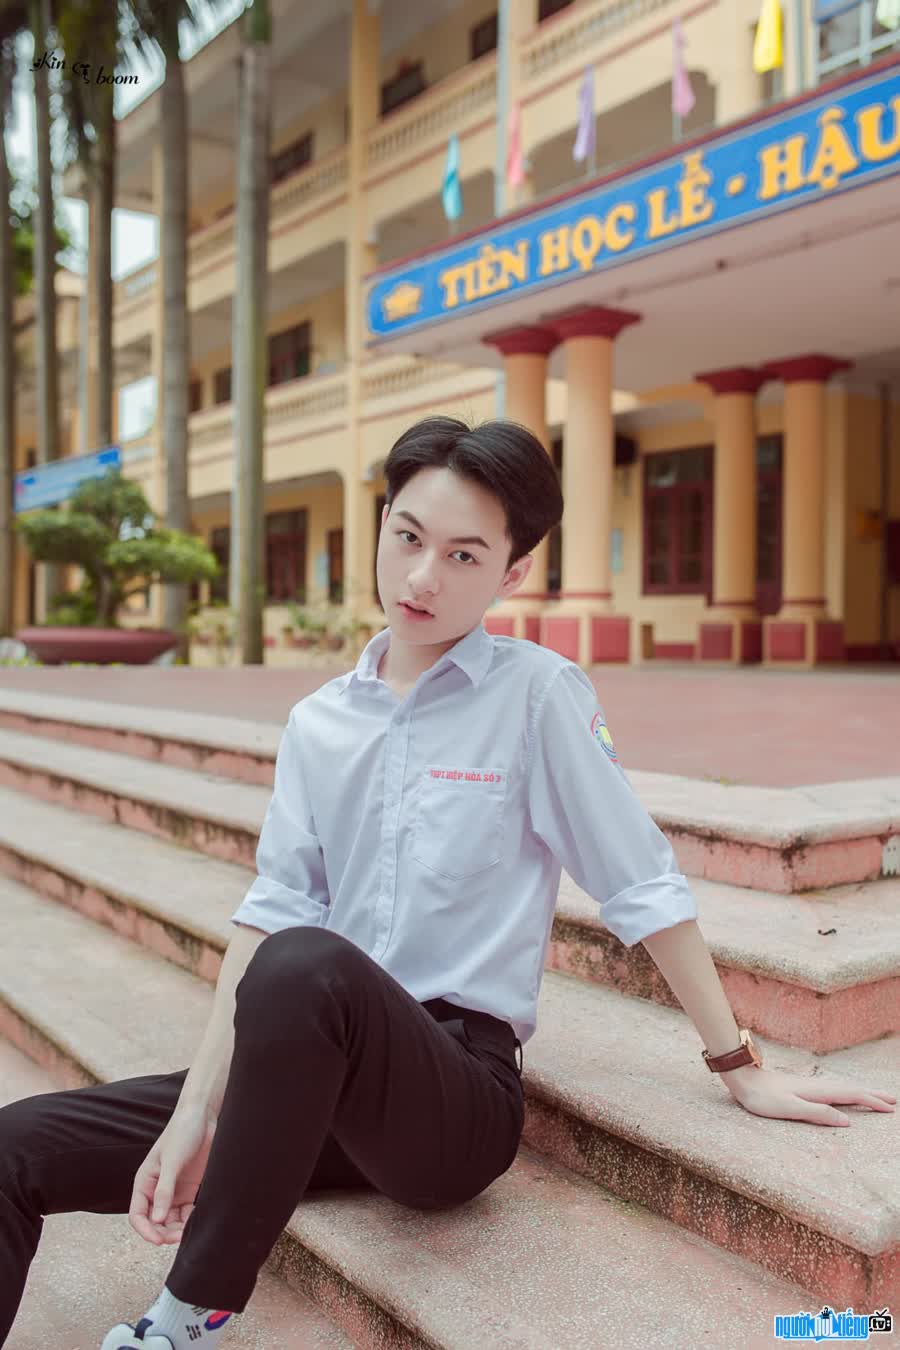 Phan Phuc is called by netizens with the nickname "uniform male god" because of his innocence and handsomeness